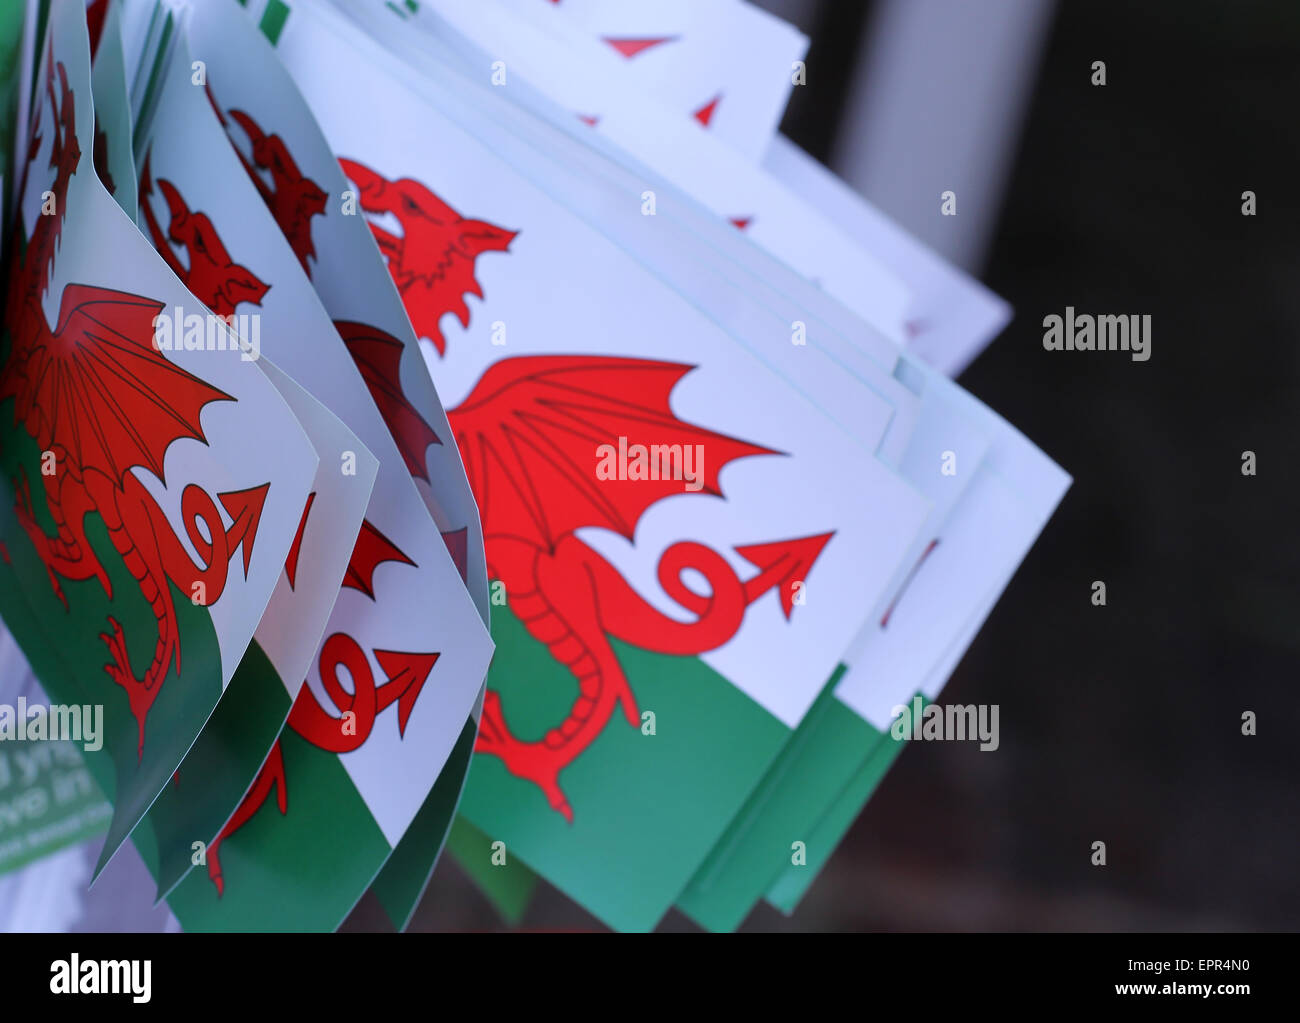 National Eisteddfod, Vale of Glamorgan, Welsh flags Stock Photo